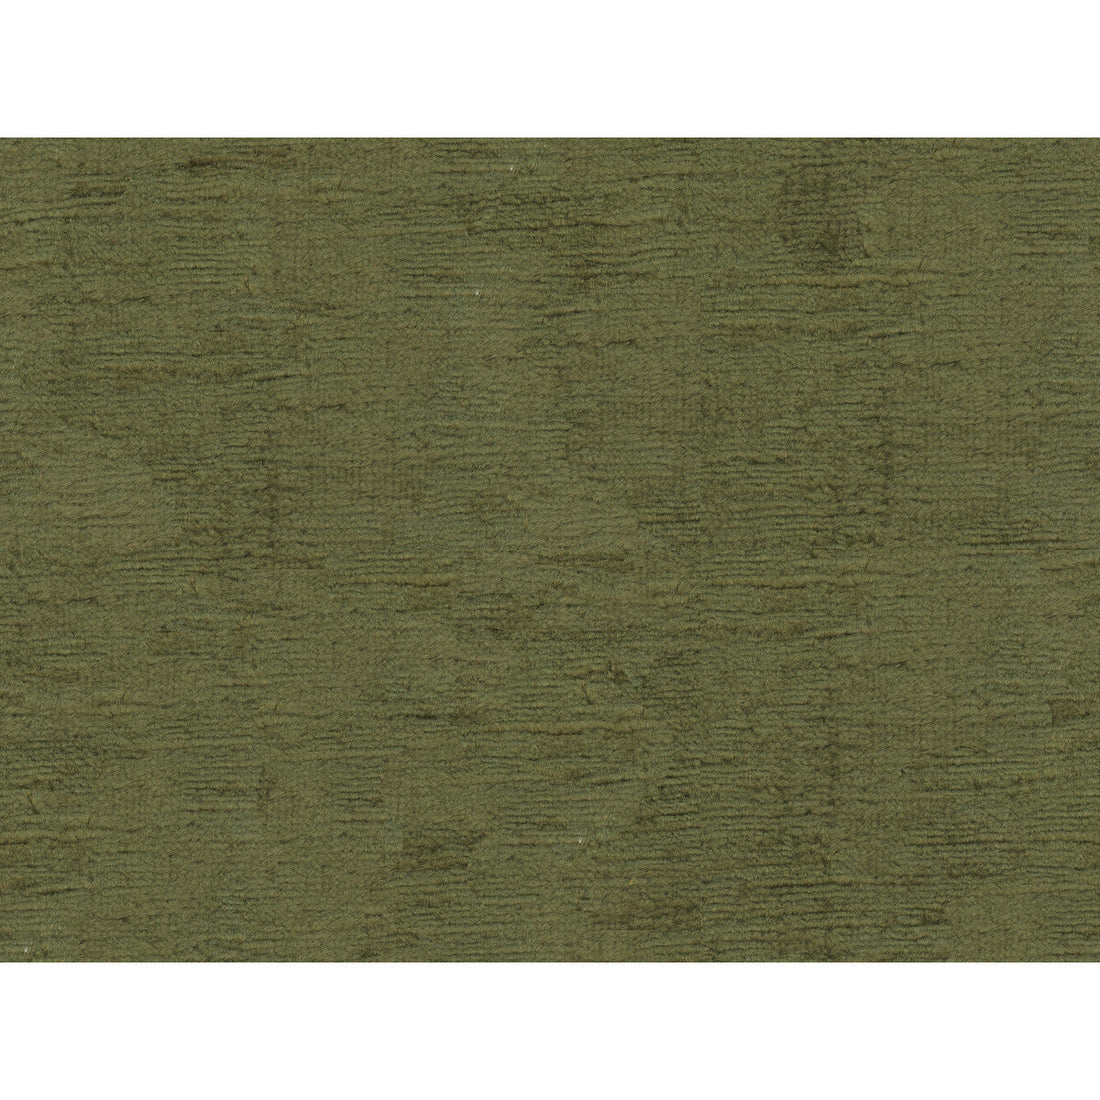 Fulham Linen V fabric in olive color - pattern 2016133.363.0 - by Lee Jofa